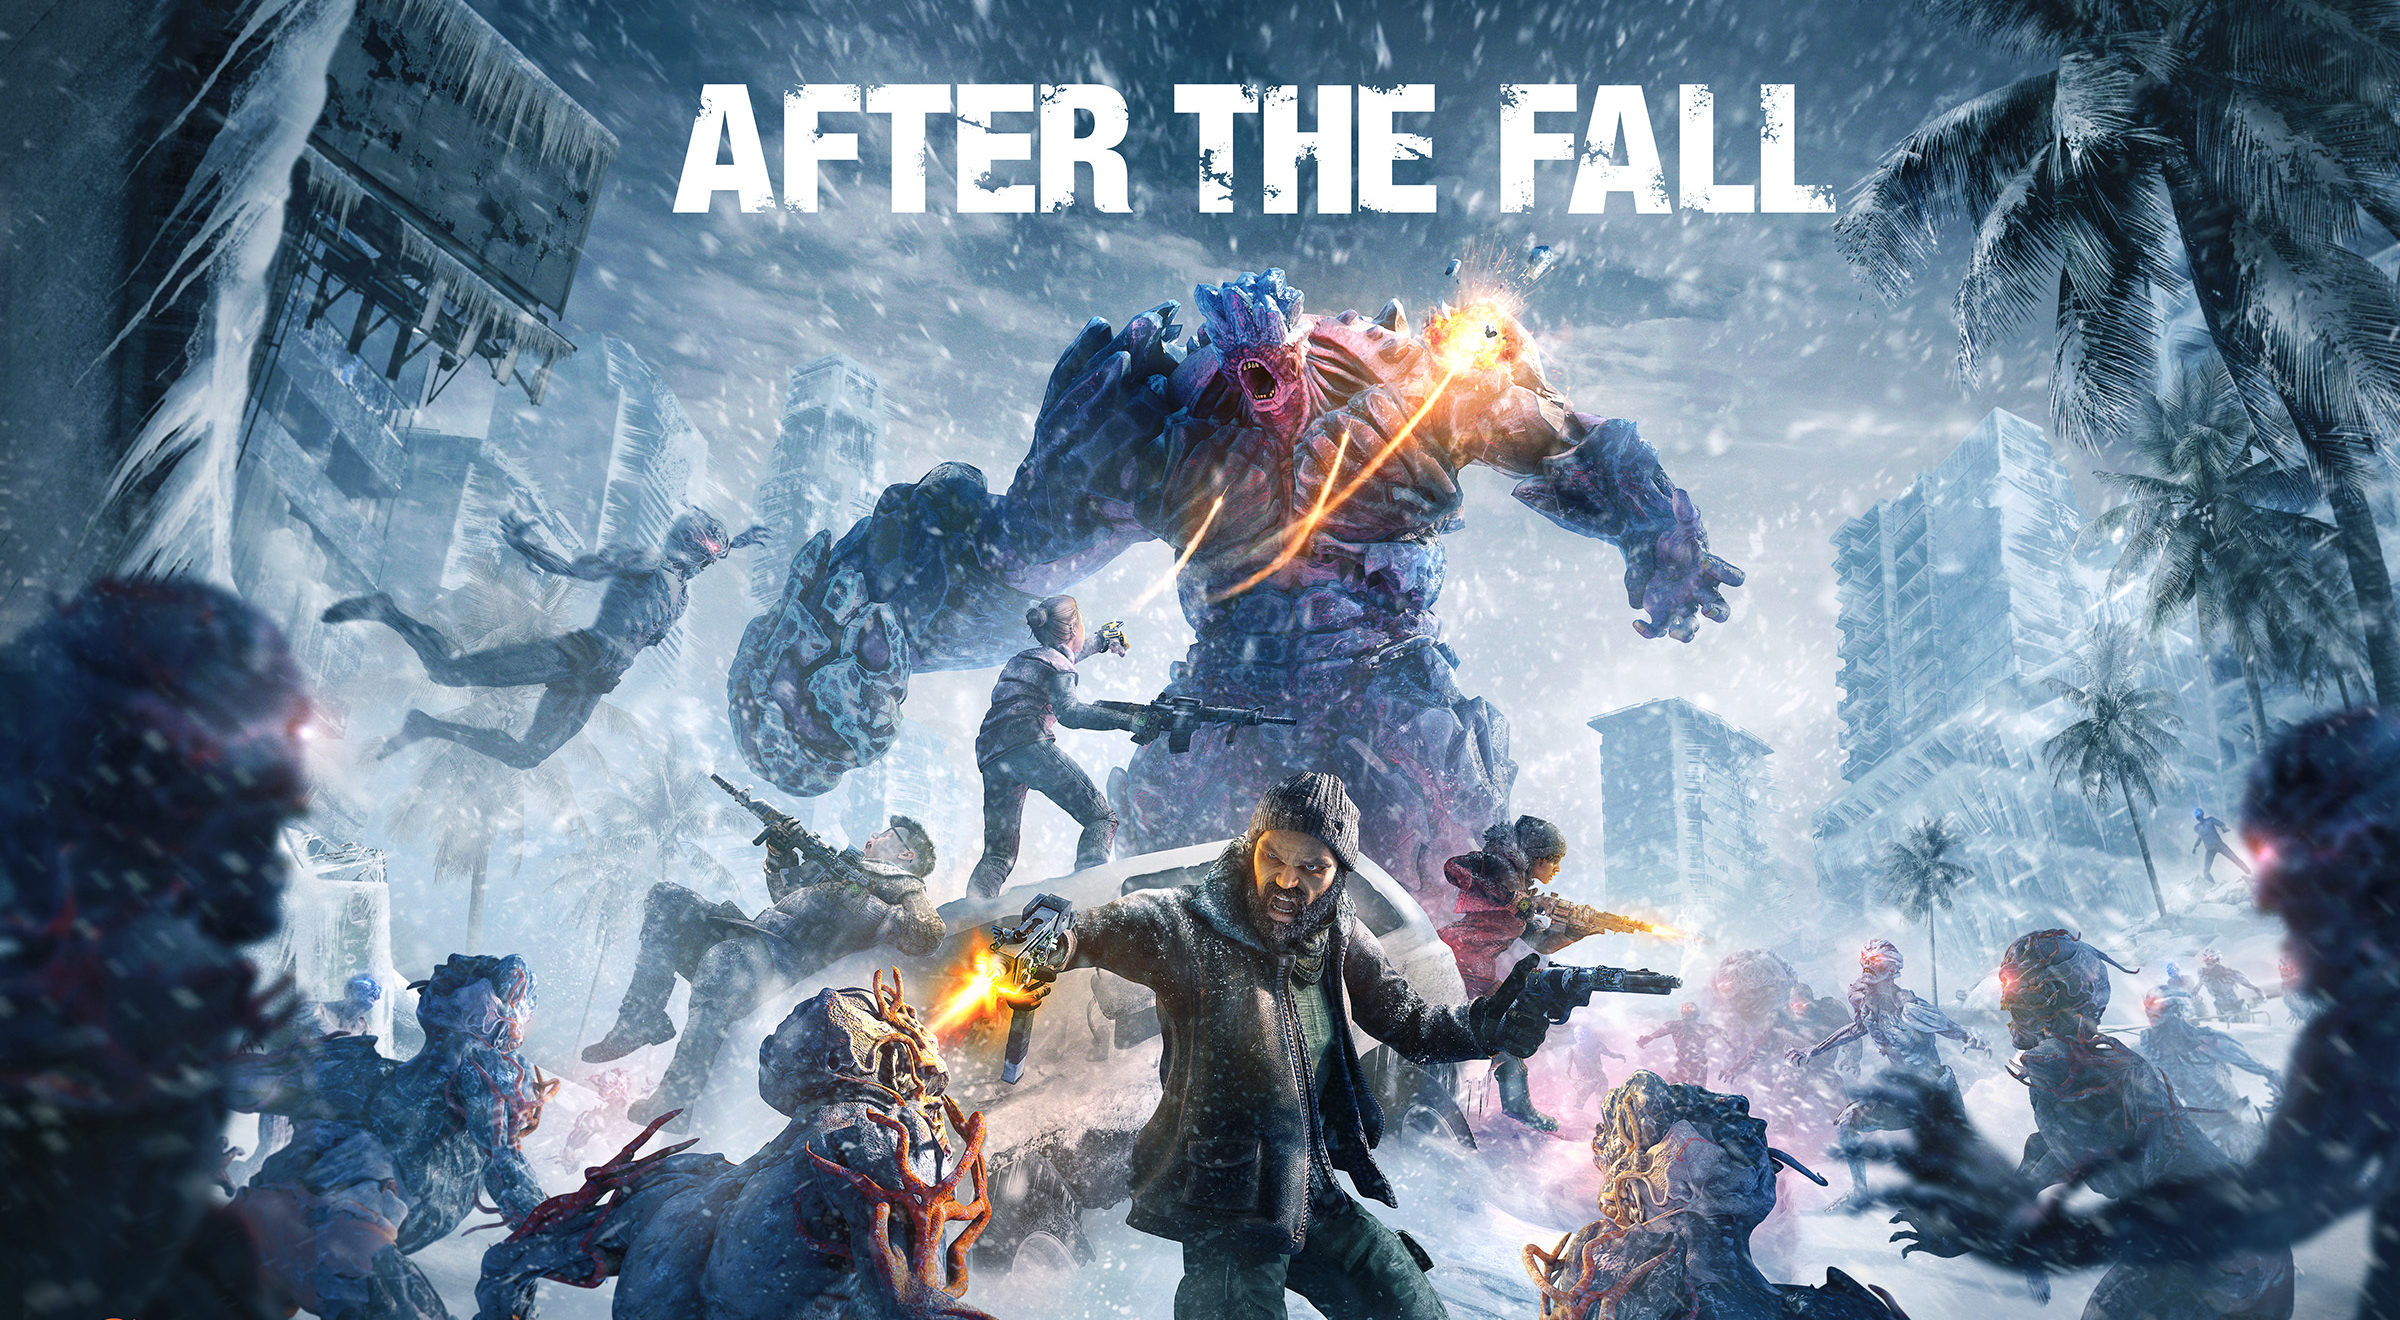 After The Fall' Looks Like The VR Zombie Game We've All Been